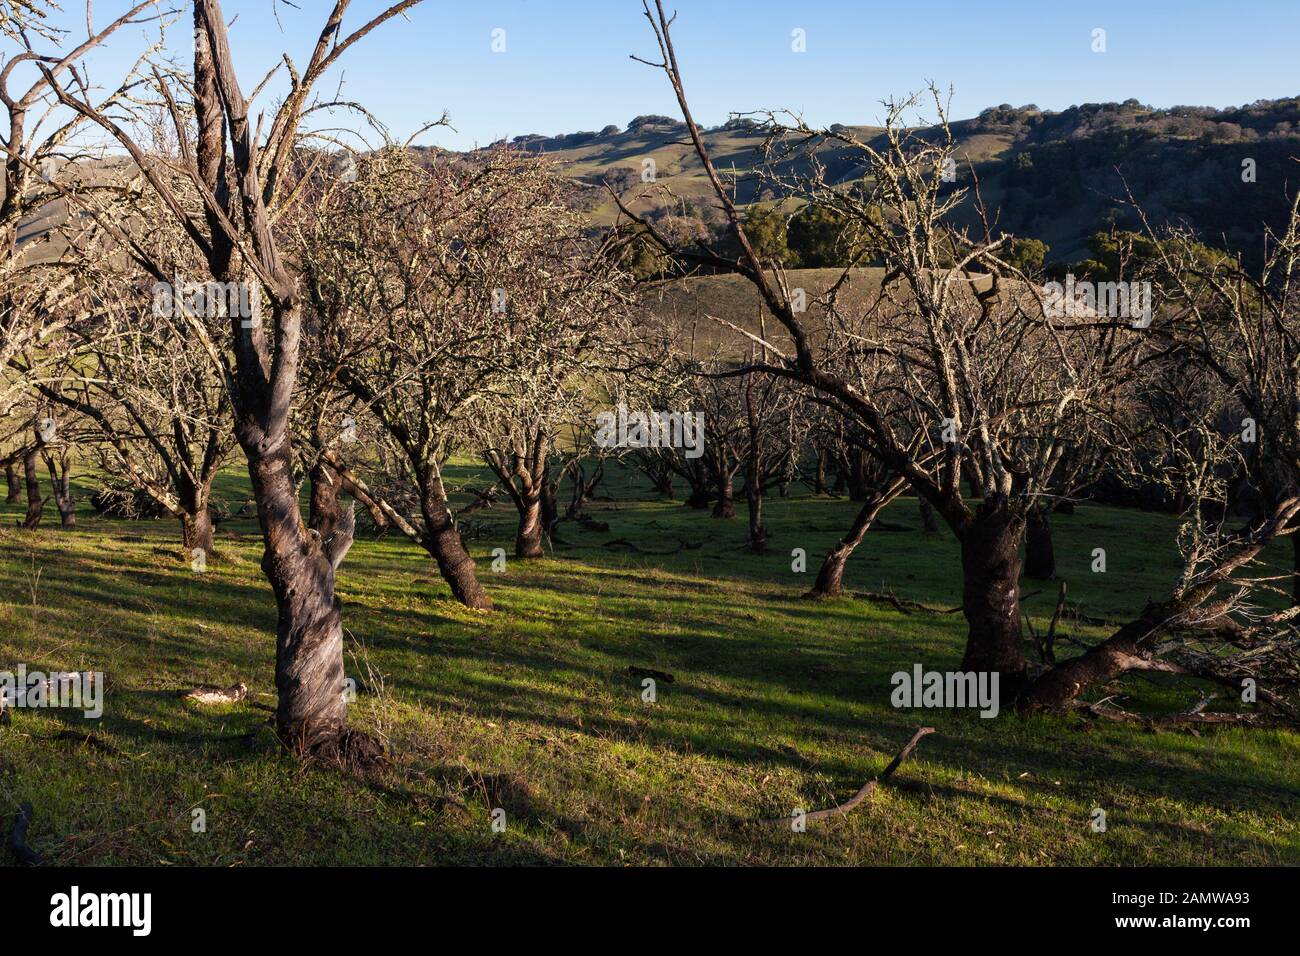 Dead orchard along the Chama Trail in East Bay Regional Parks Morgan Territory Regional Preserve. Stock Photo